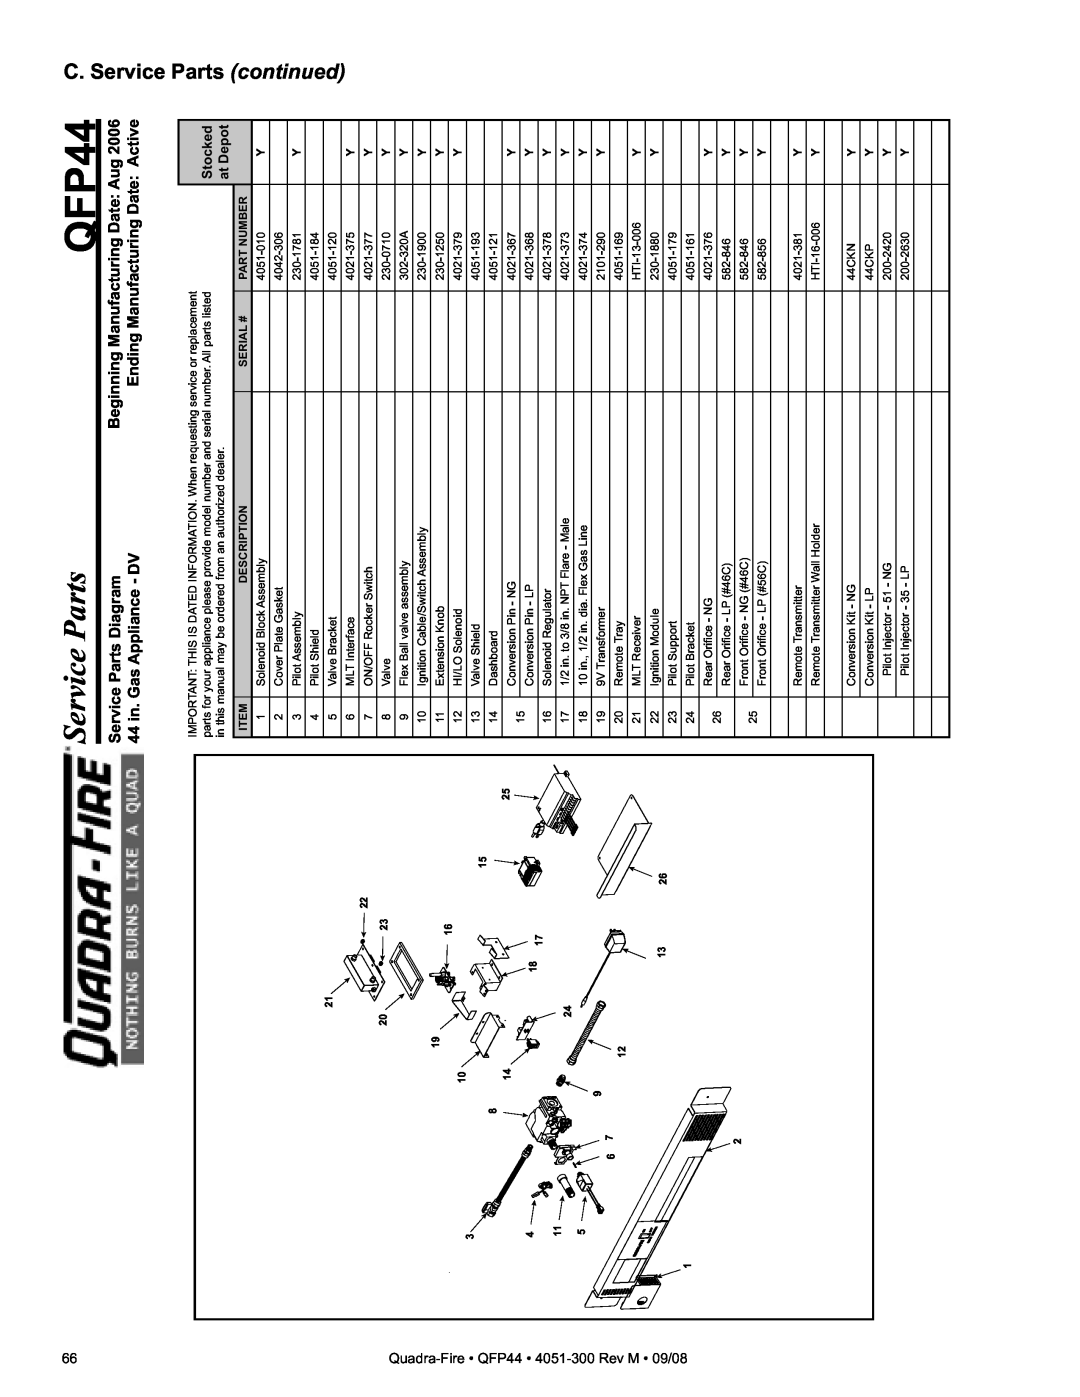 Quadra-Fire QFP44 C. Service Parts continued, Service Parts Diagram, Beginning Manufacturing Date Aug, Stocked, at Depot 